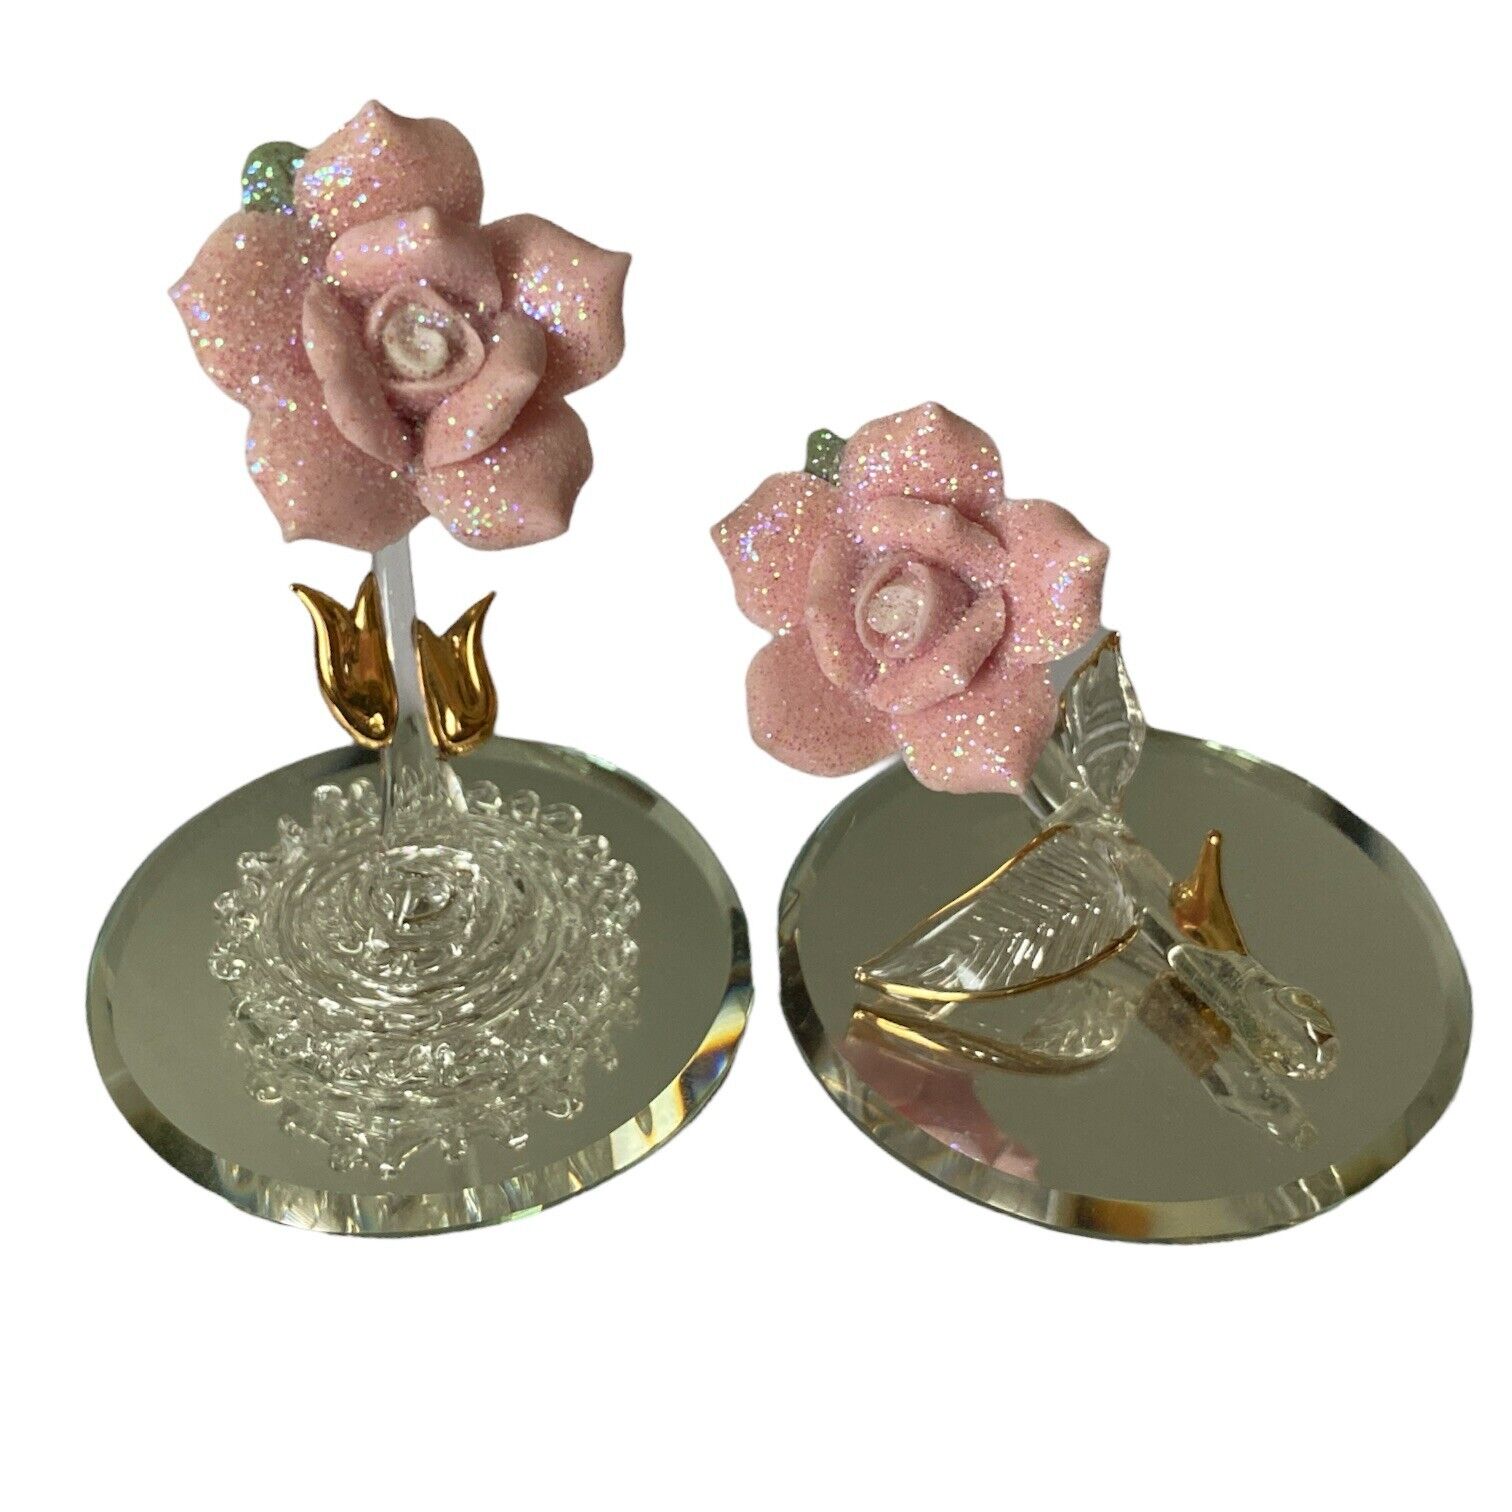 Glass Baron Crystal Roses LOT 2x Pink Glitter Gold Thorns Mirror Base Vintage